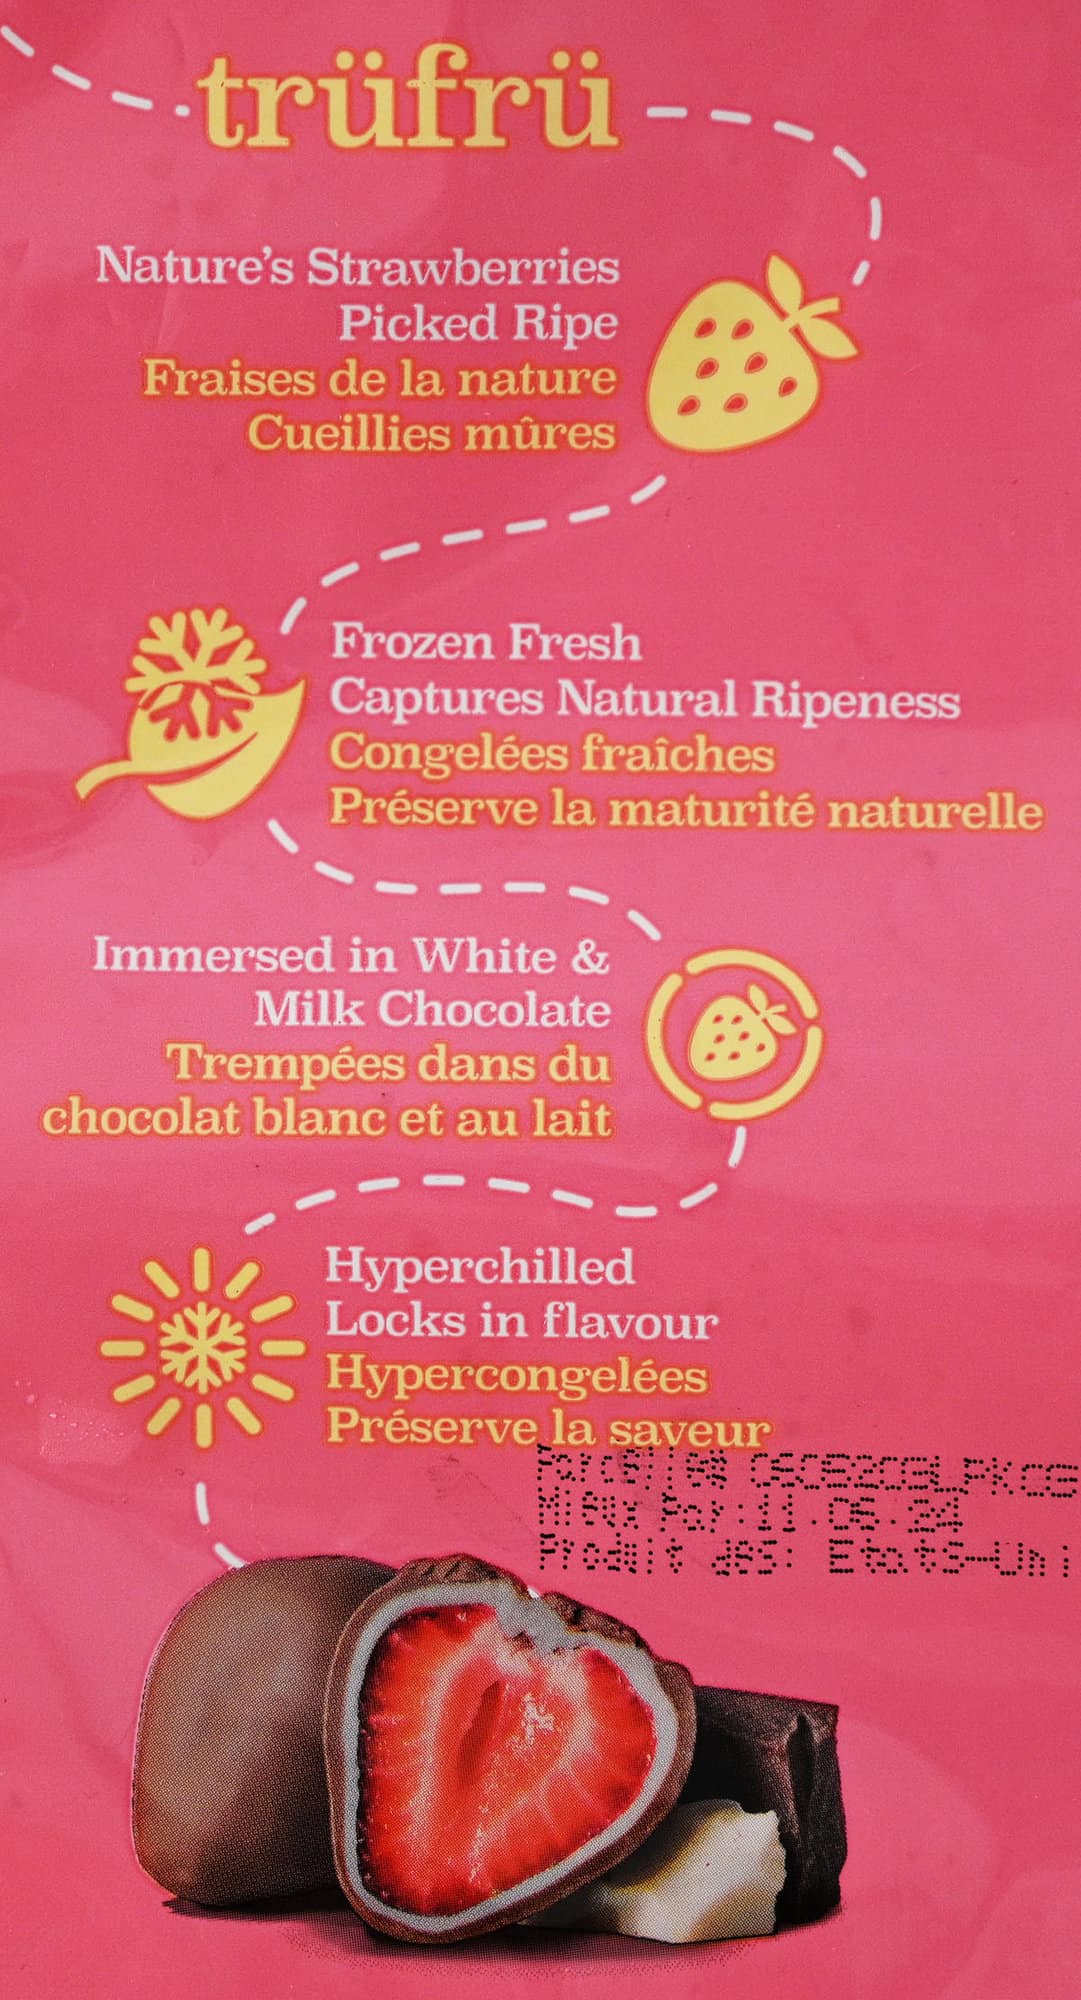 Image of the product description from the bag of the Costco Tru Fru Frozen Chocolate Covered Strawberries. 